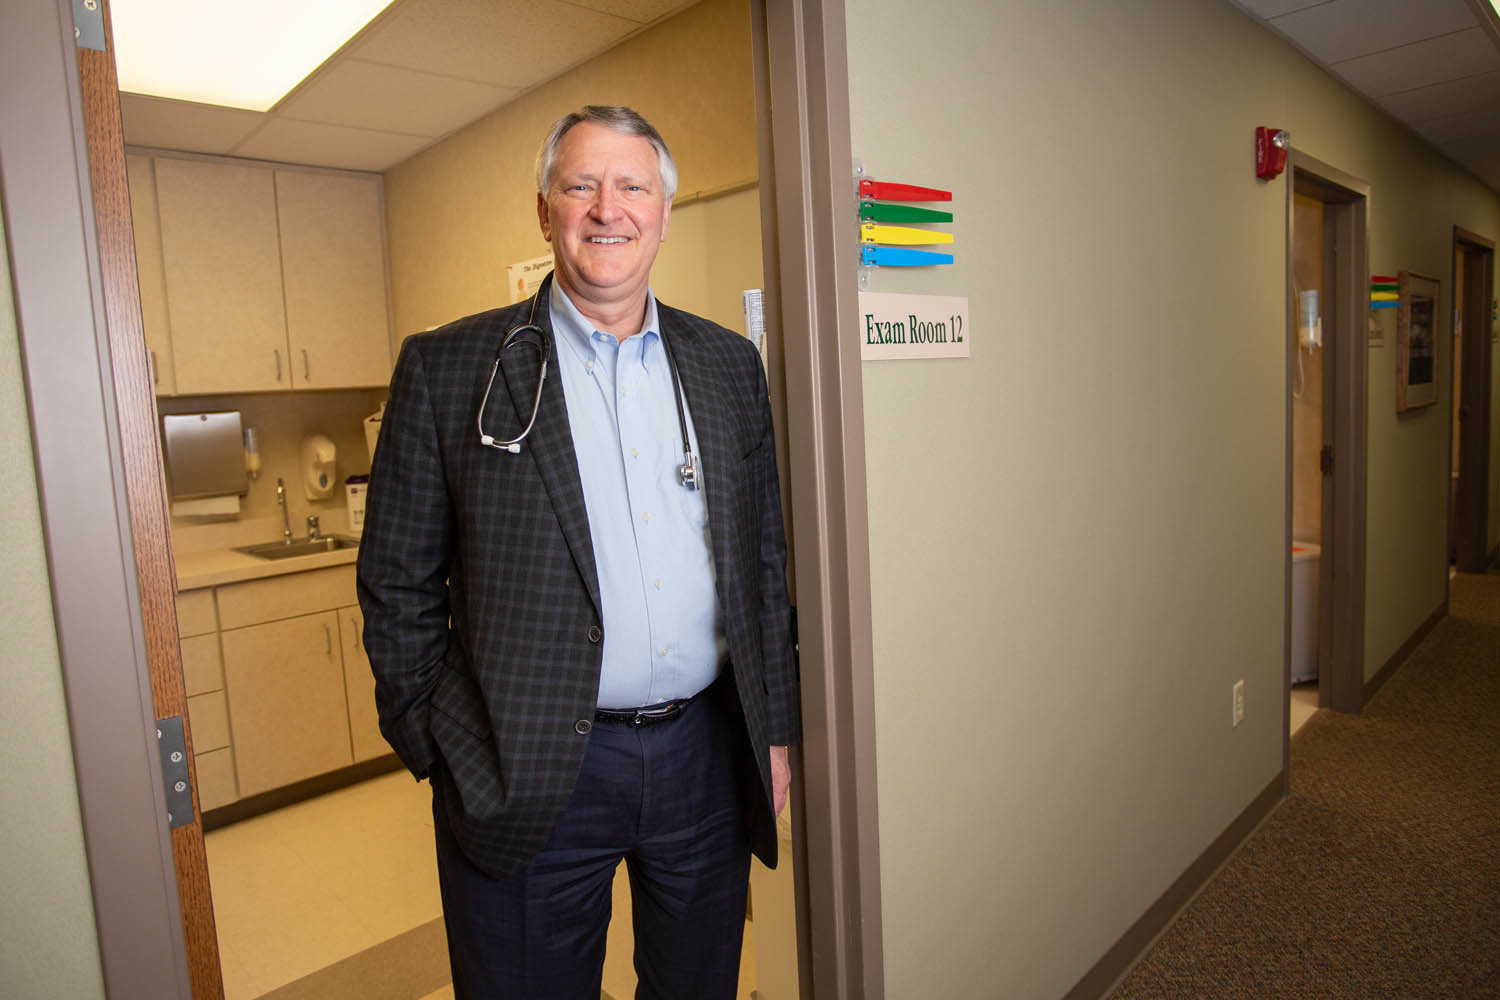 Dr. David Barbe is leading an organization with more than 9 million members.